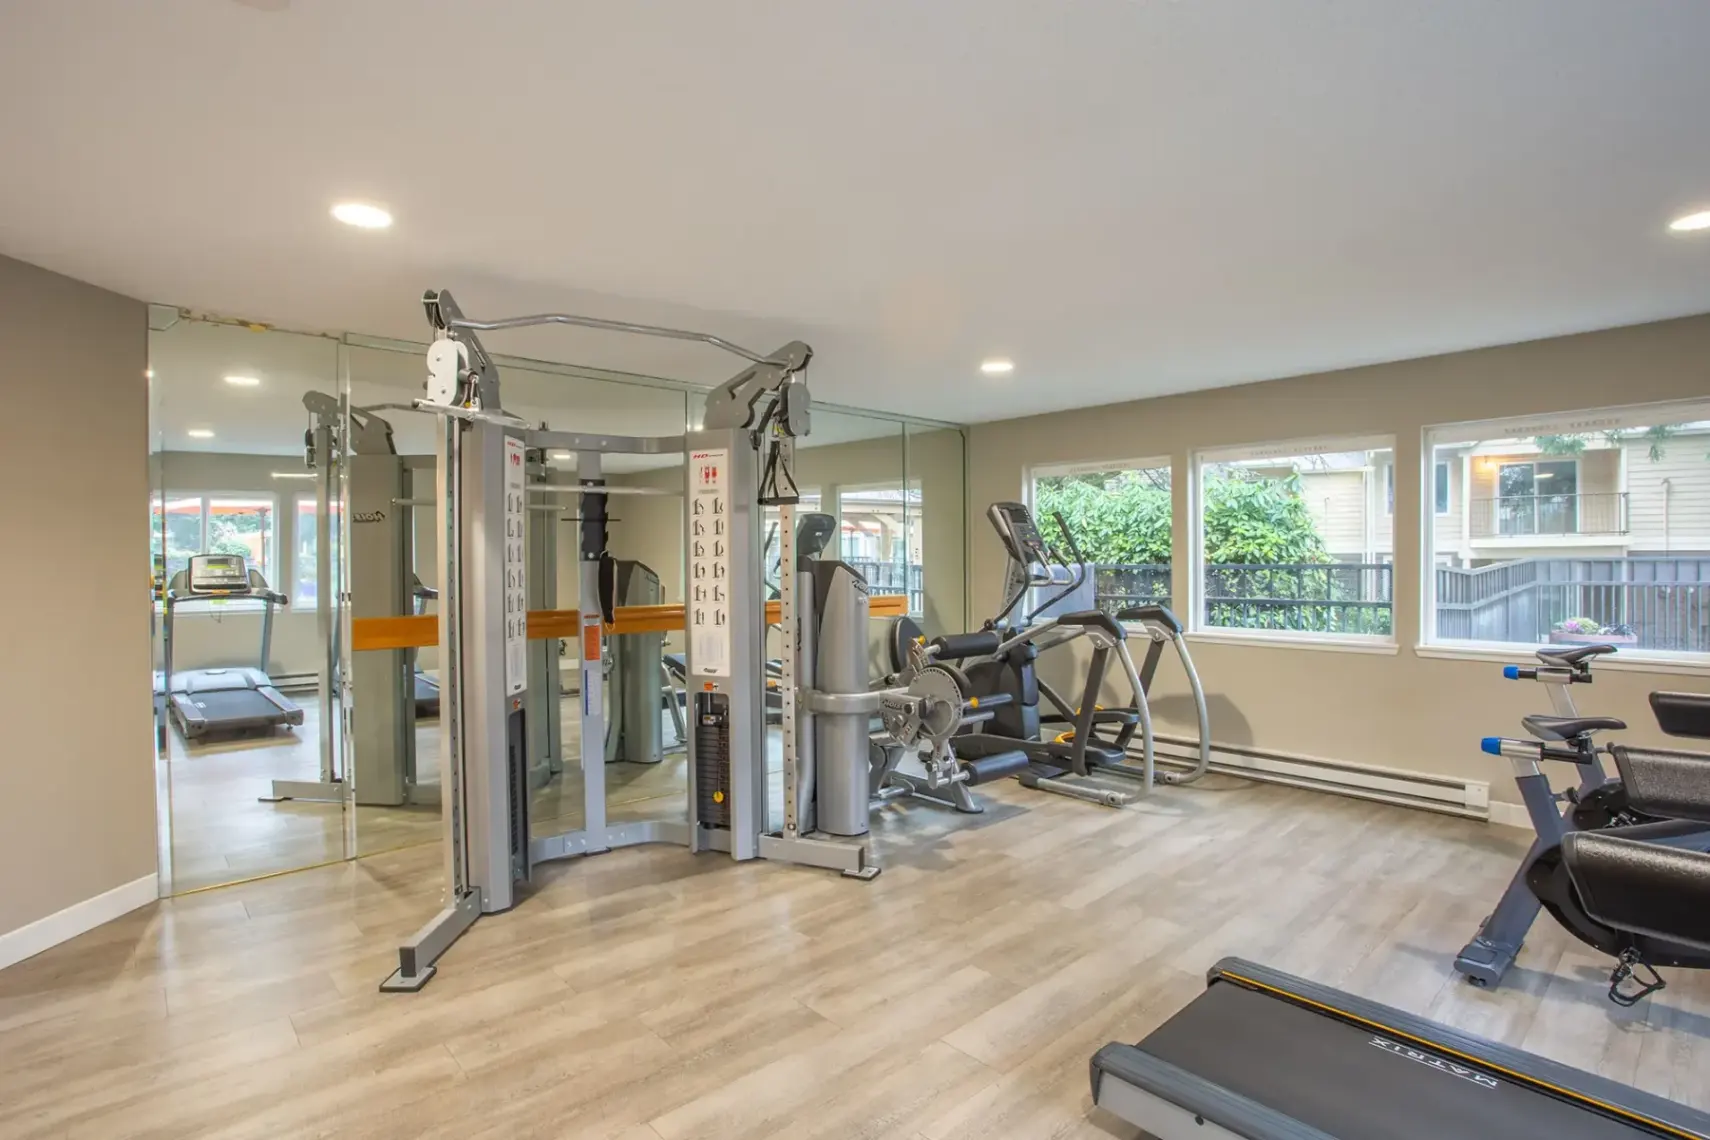 Fitness Center with cardio and strength training equipment